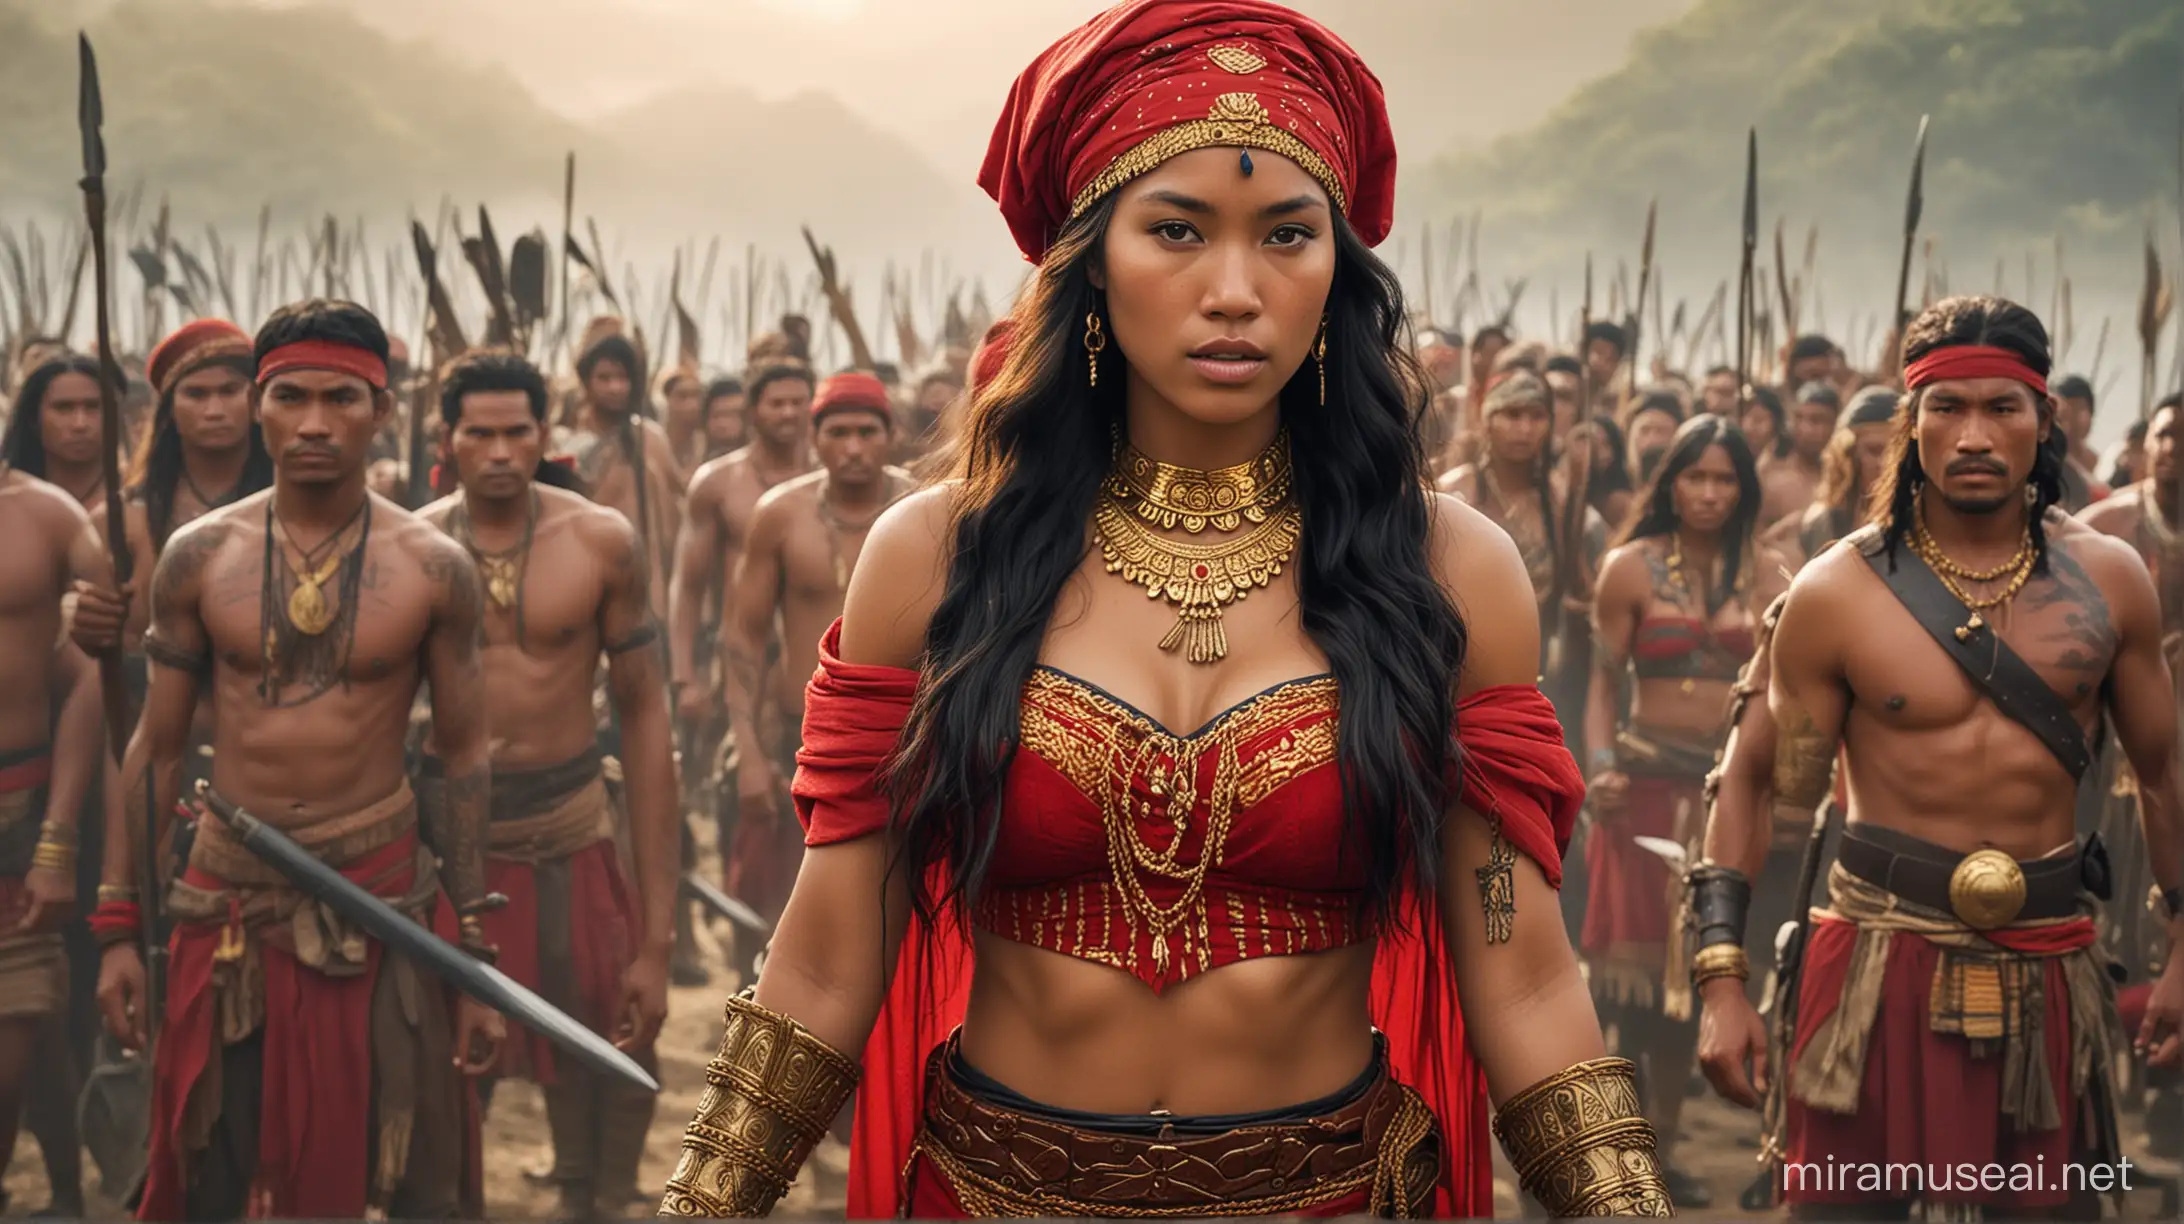 Precolonial Filipina Warrior Protecting Indigenous Natives Against Spanish Colonizers